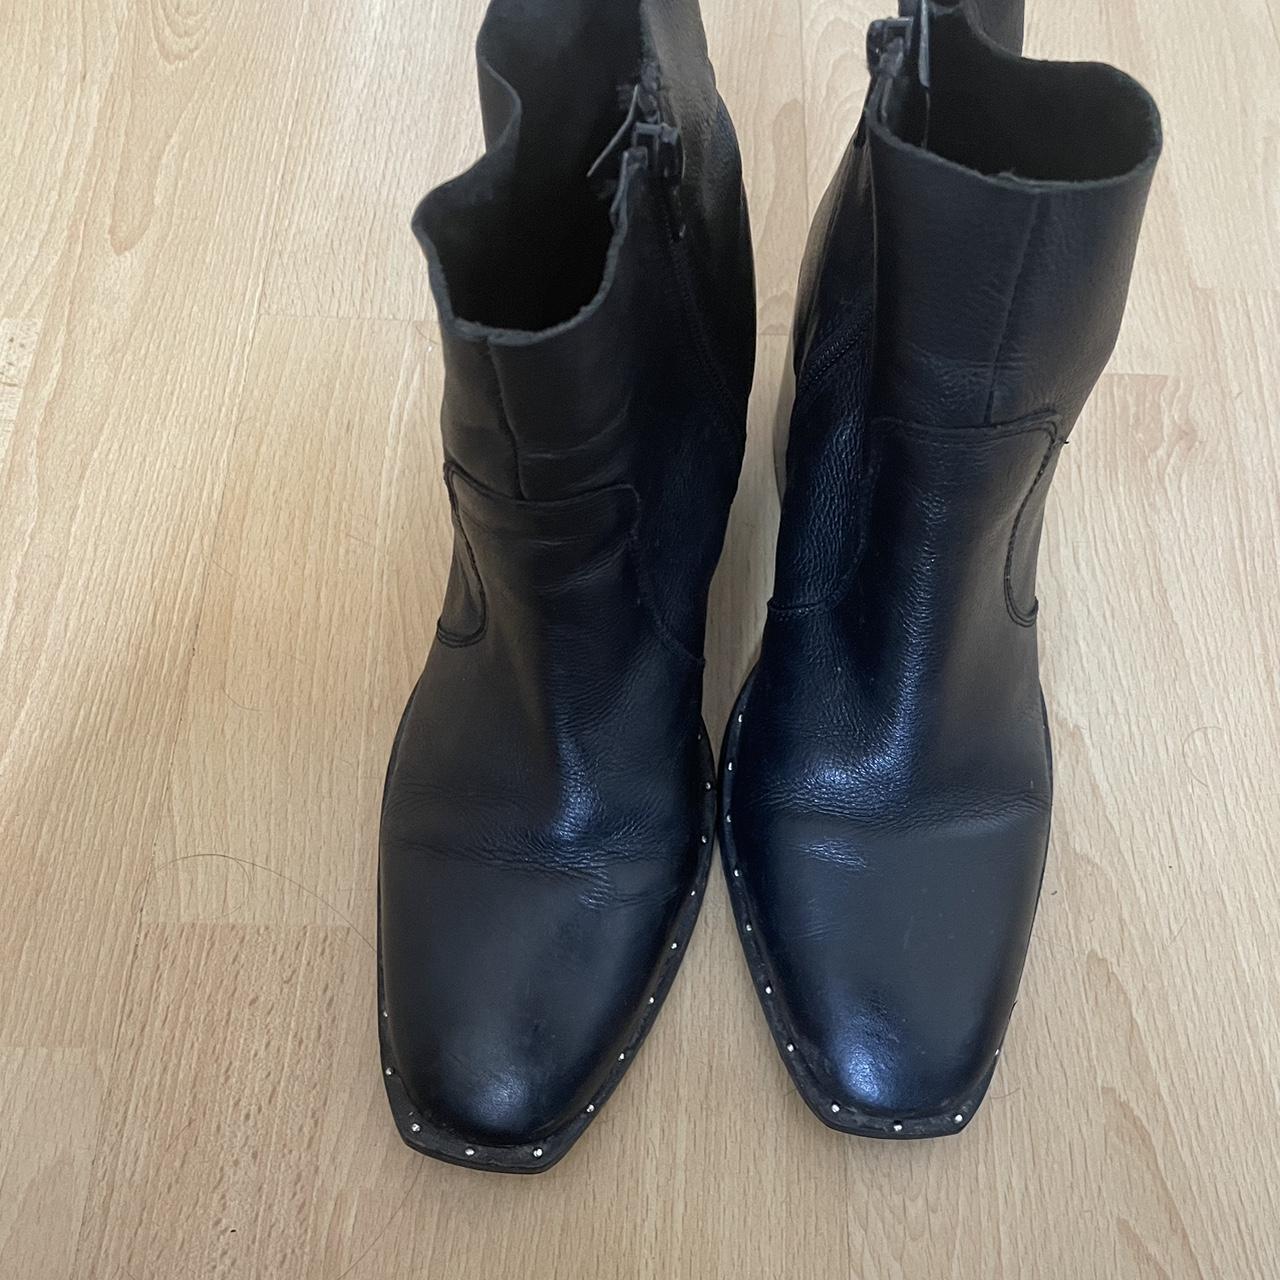 ASOS Size 6 black boots Worn in good condition - Depop